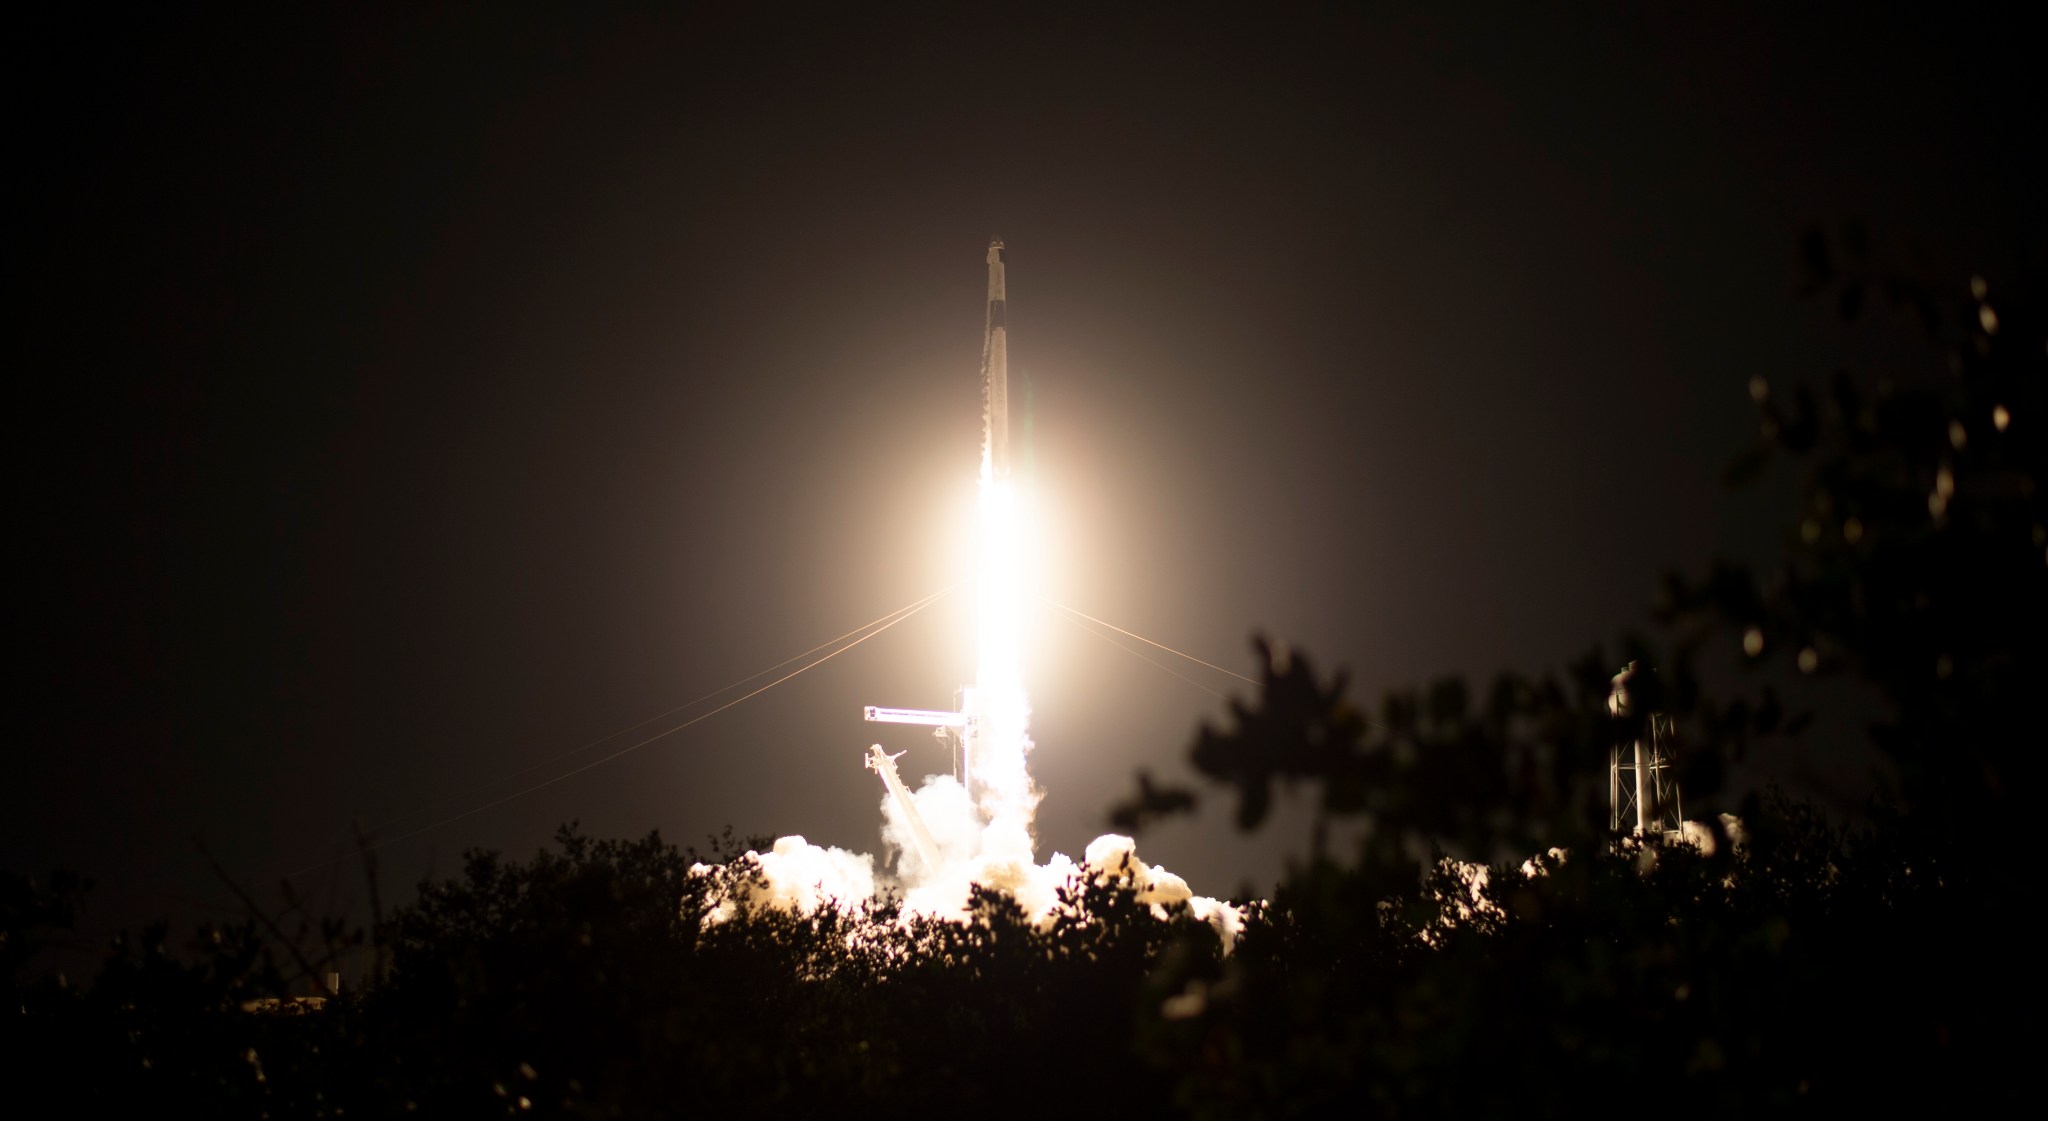 A SpaceX Falcon 9 rocket carrying the company's Crew Dragon spacecraft is launched on NASA’s SpaceX Crew-2 mission.